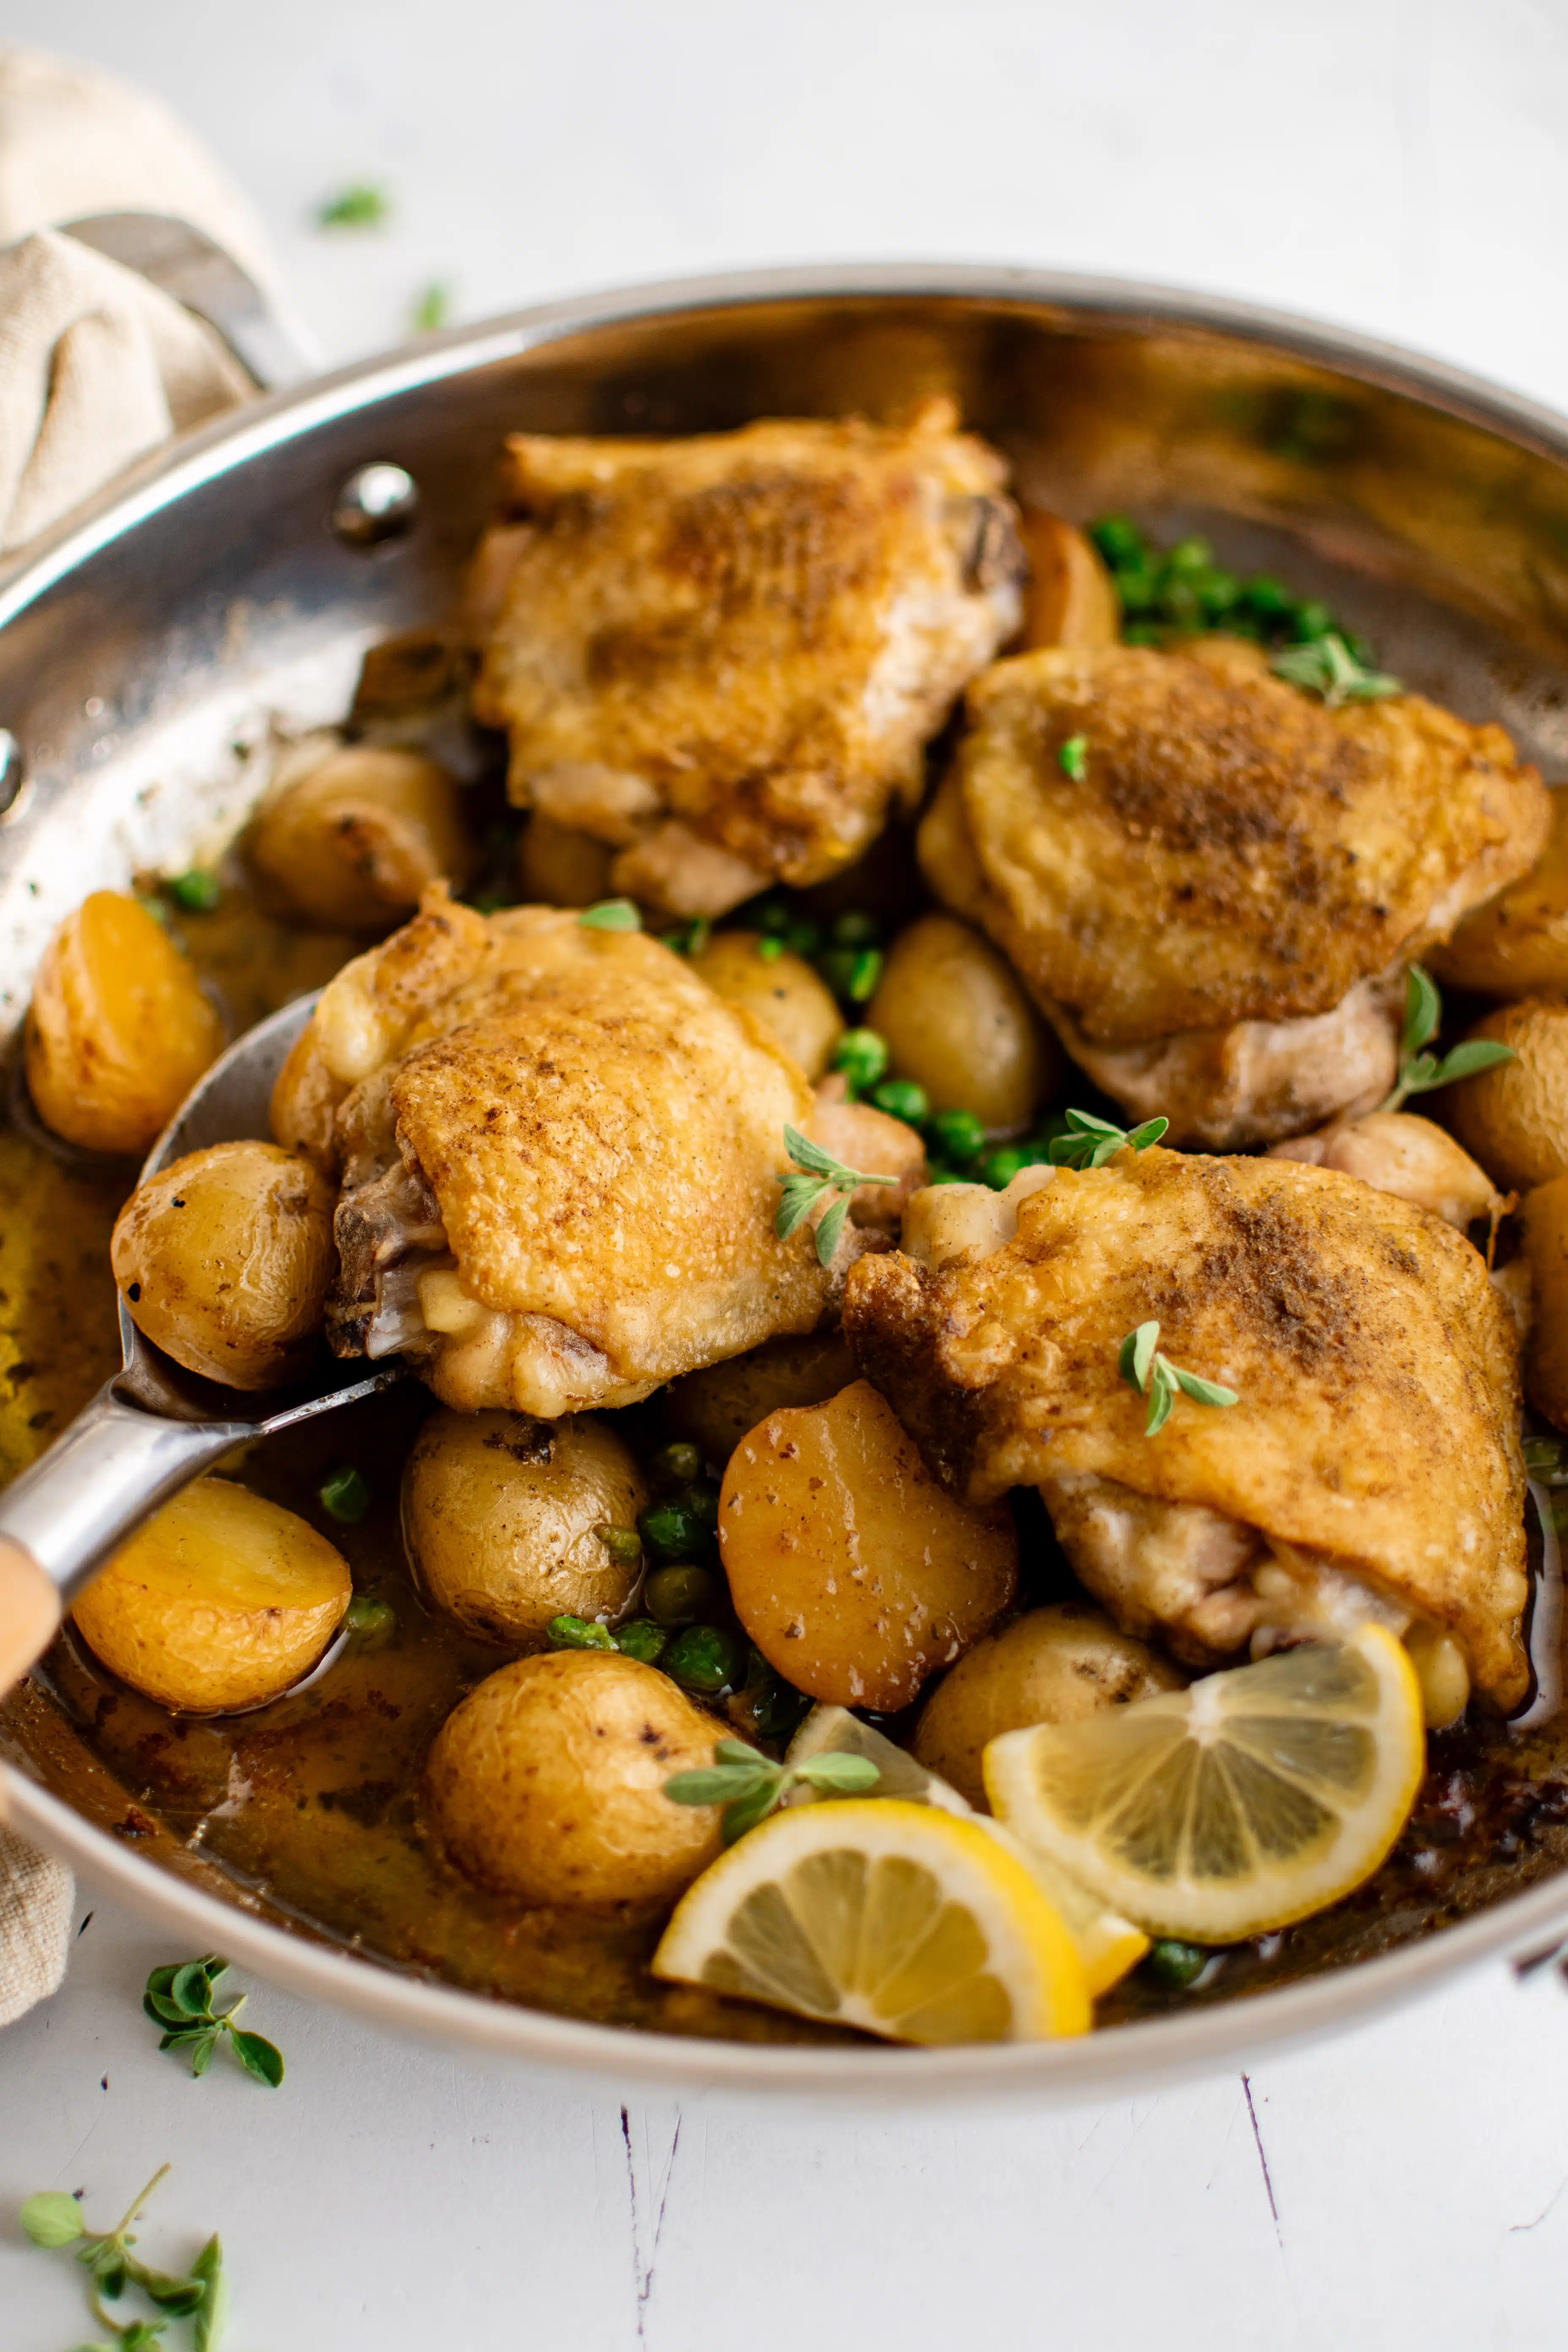 Large oven-safe pan filled with cooked chicken vesuvio recipe made with four bone-in skin-on chicken thighs, halved potatoes, garlic, lemon juice, and green peas.